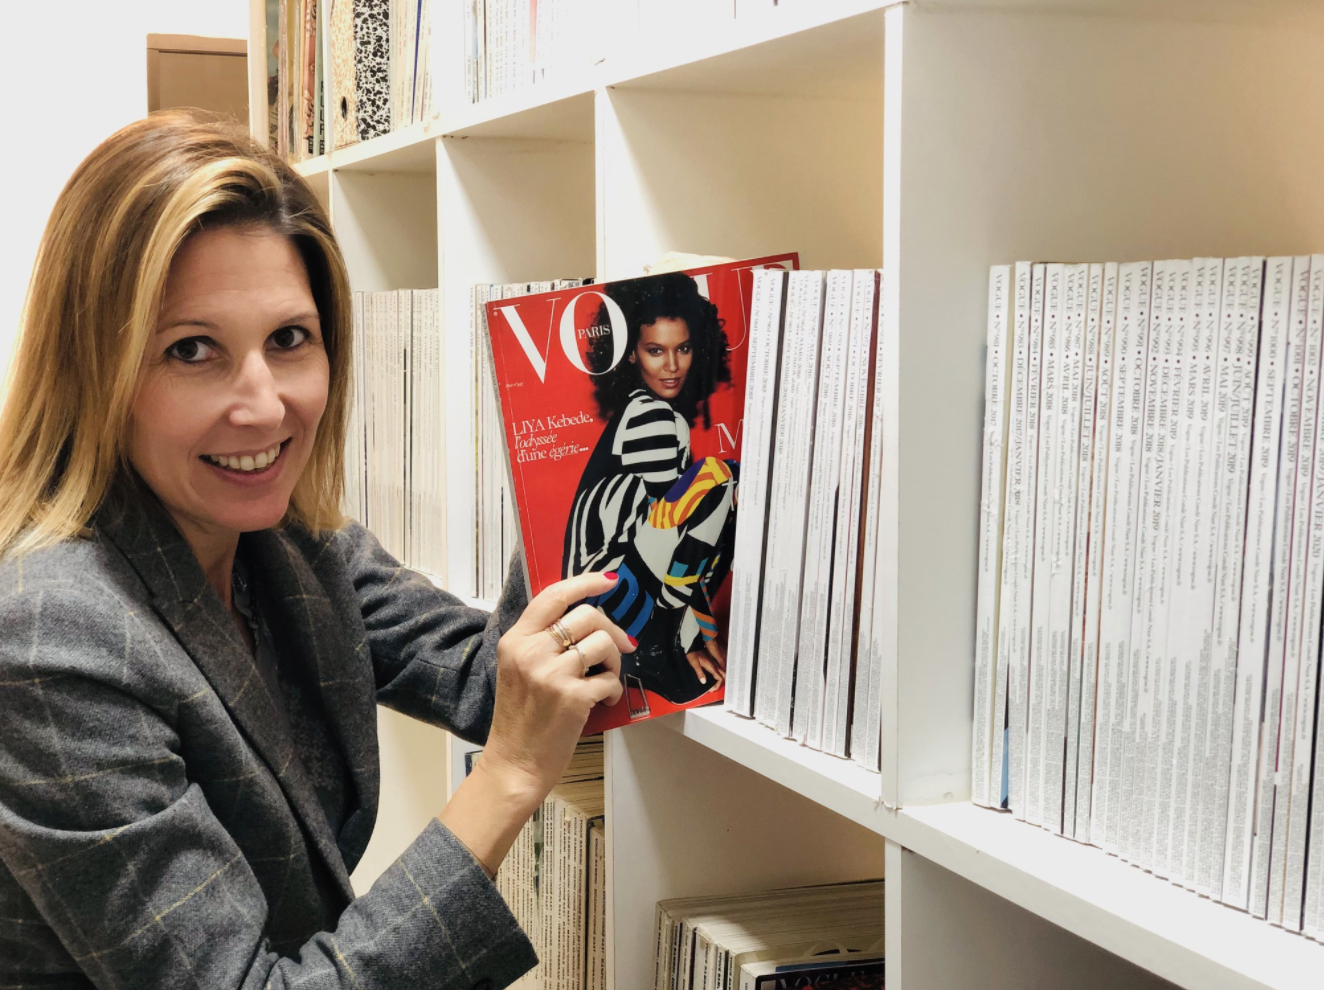 Camille and the hundreds of issues of Vogue at the HQ of Modèle Déposé.